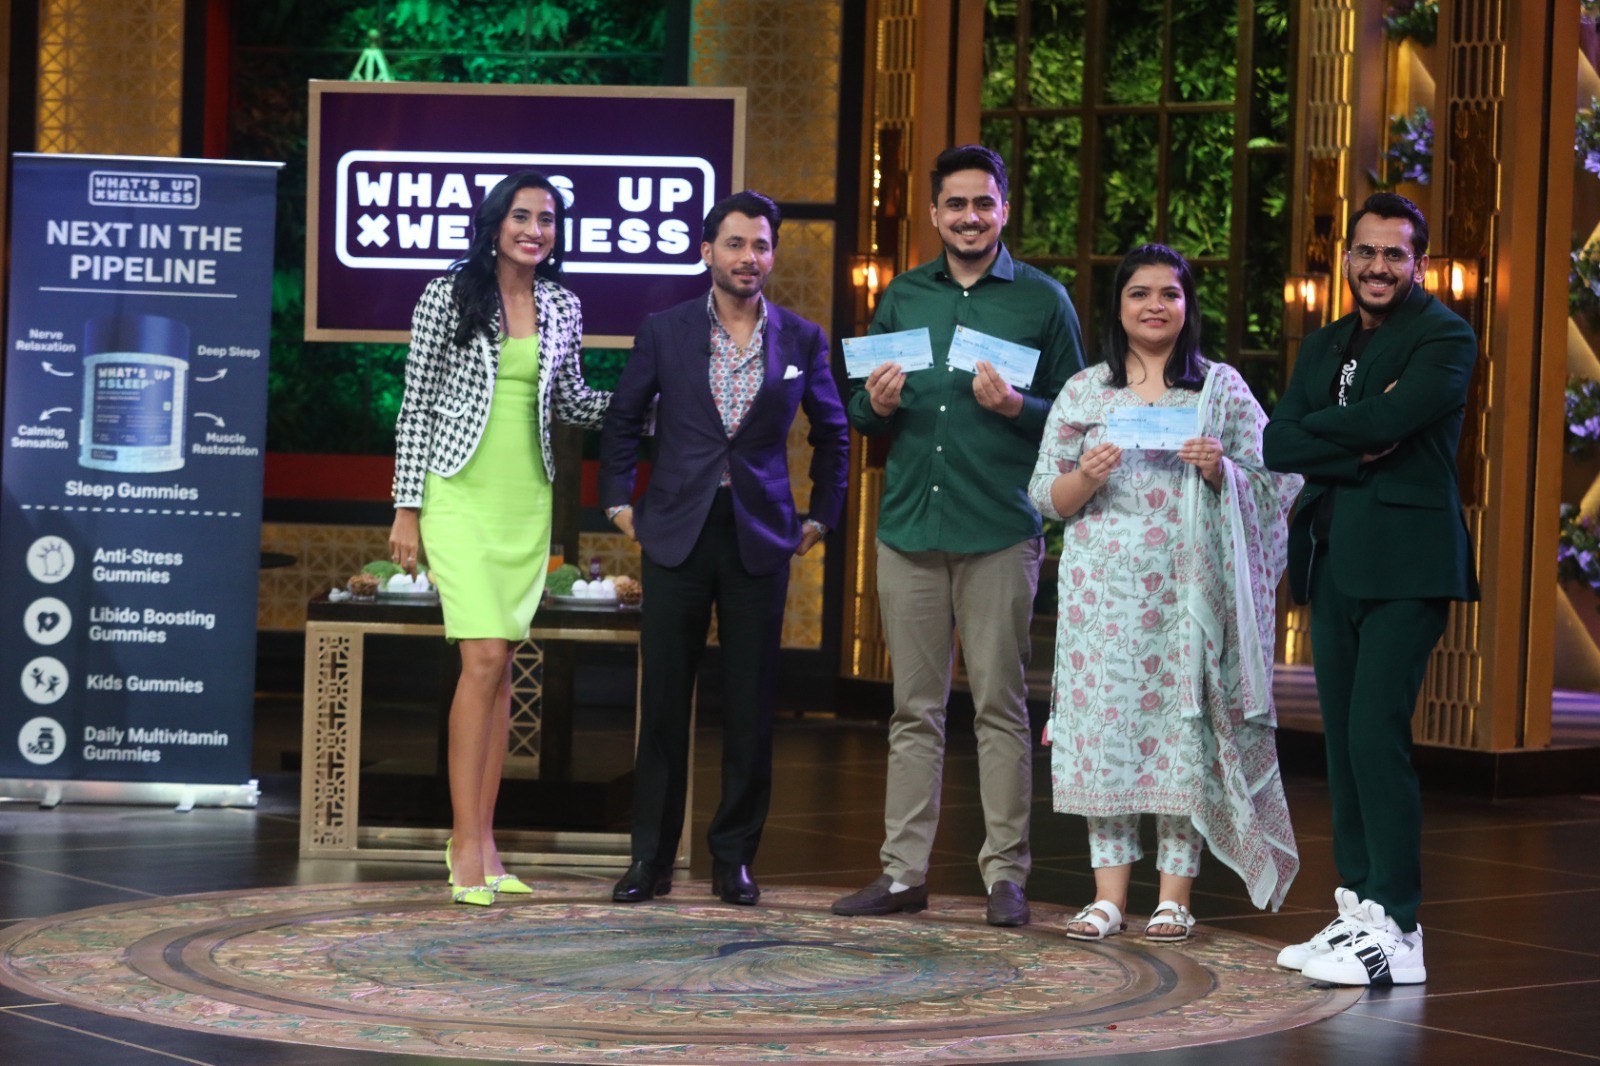 whats-up-wellness-featured-on-shark-tank-india